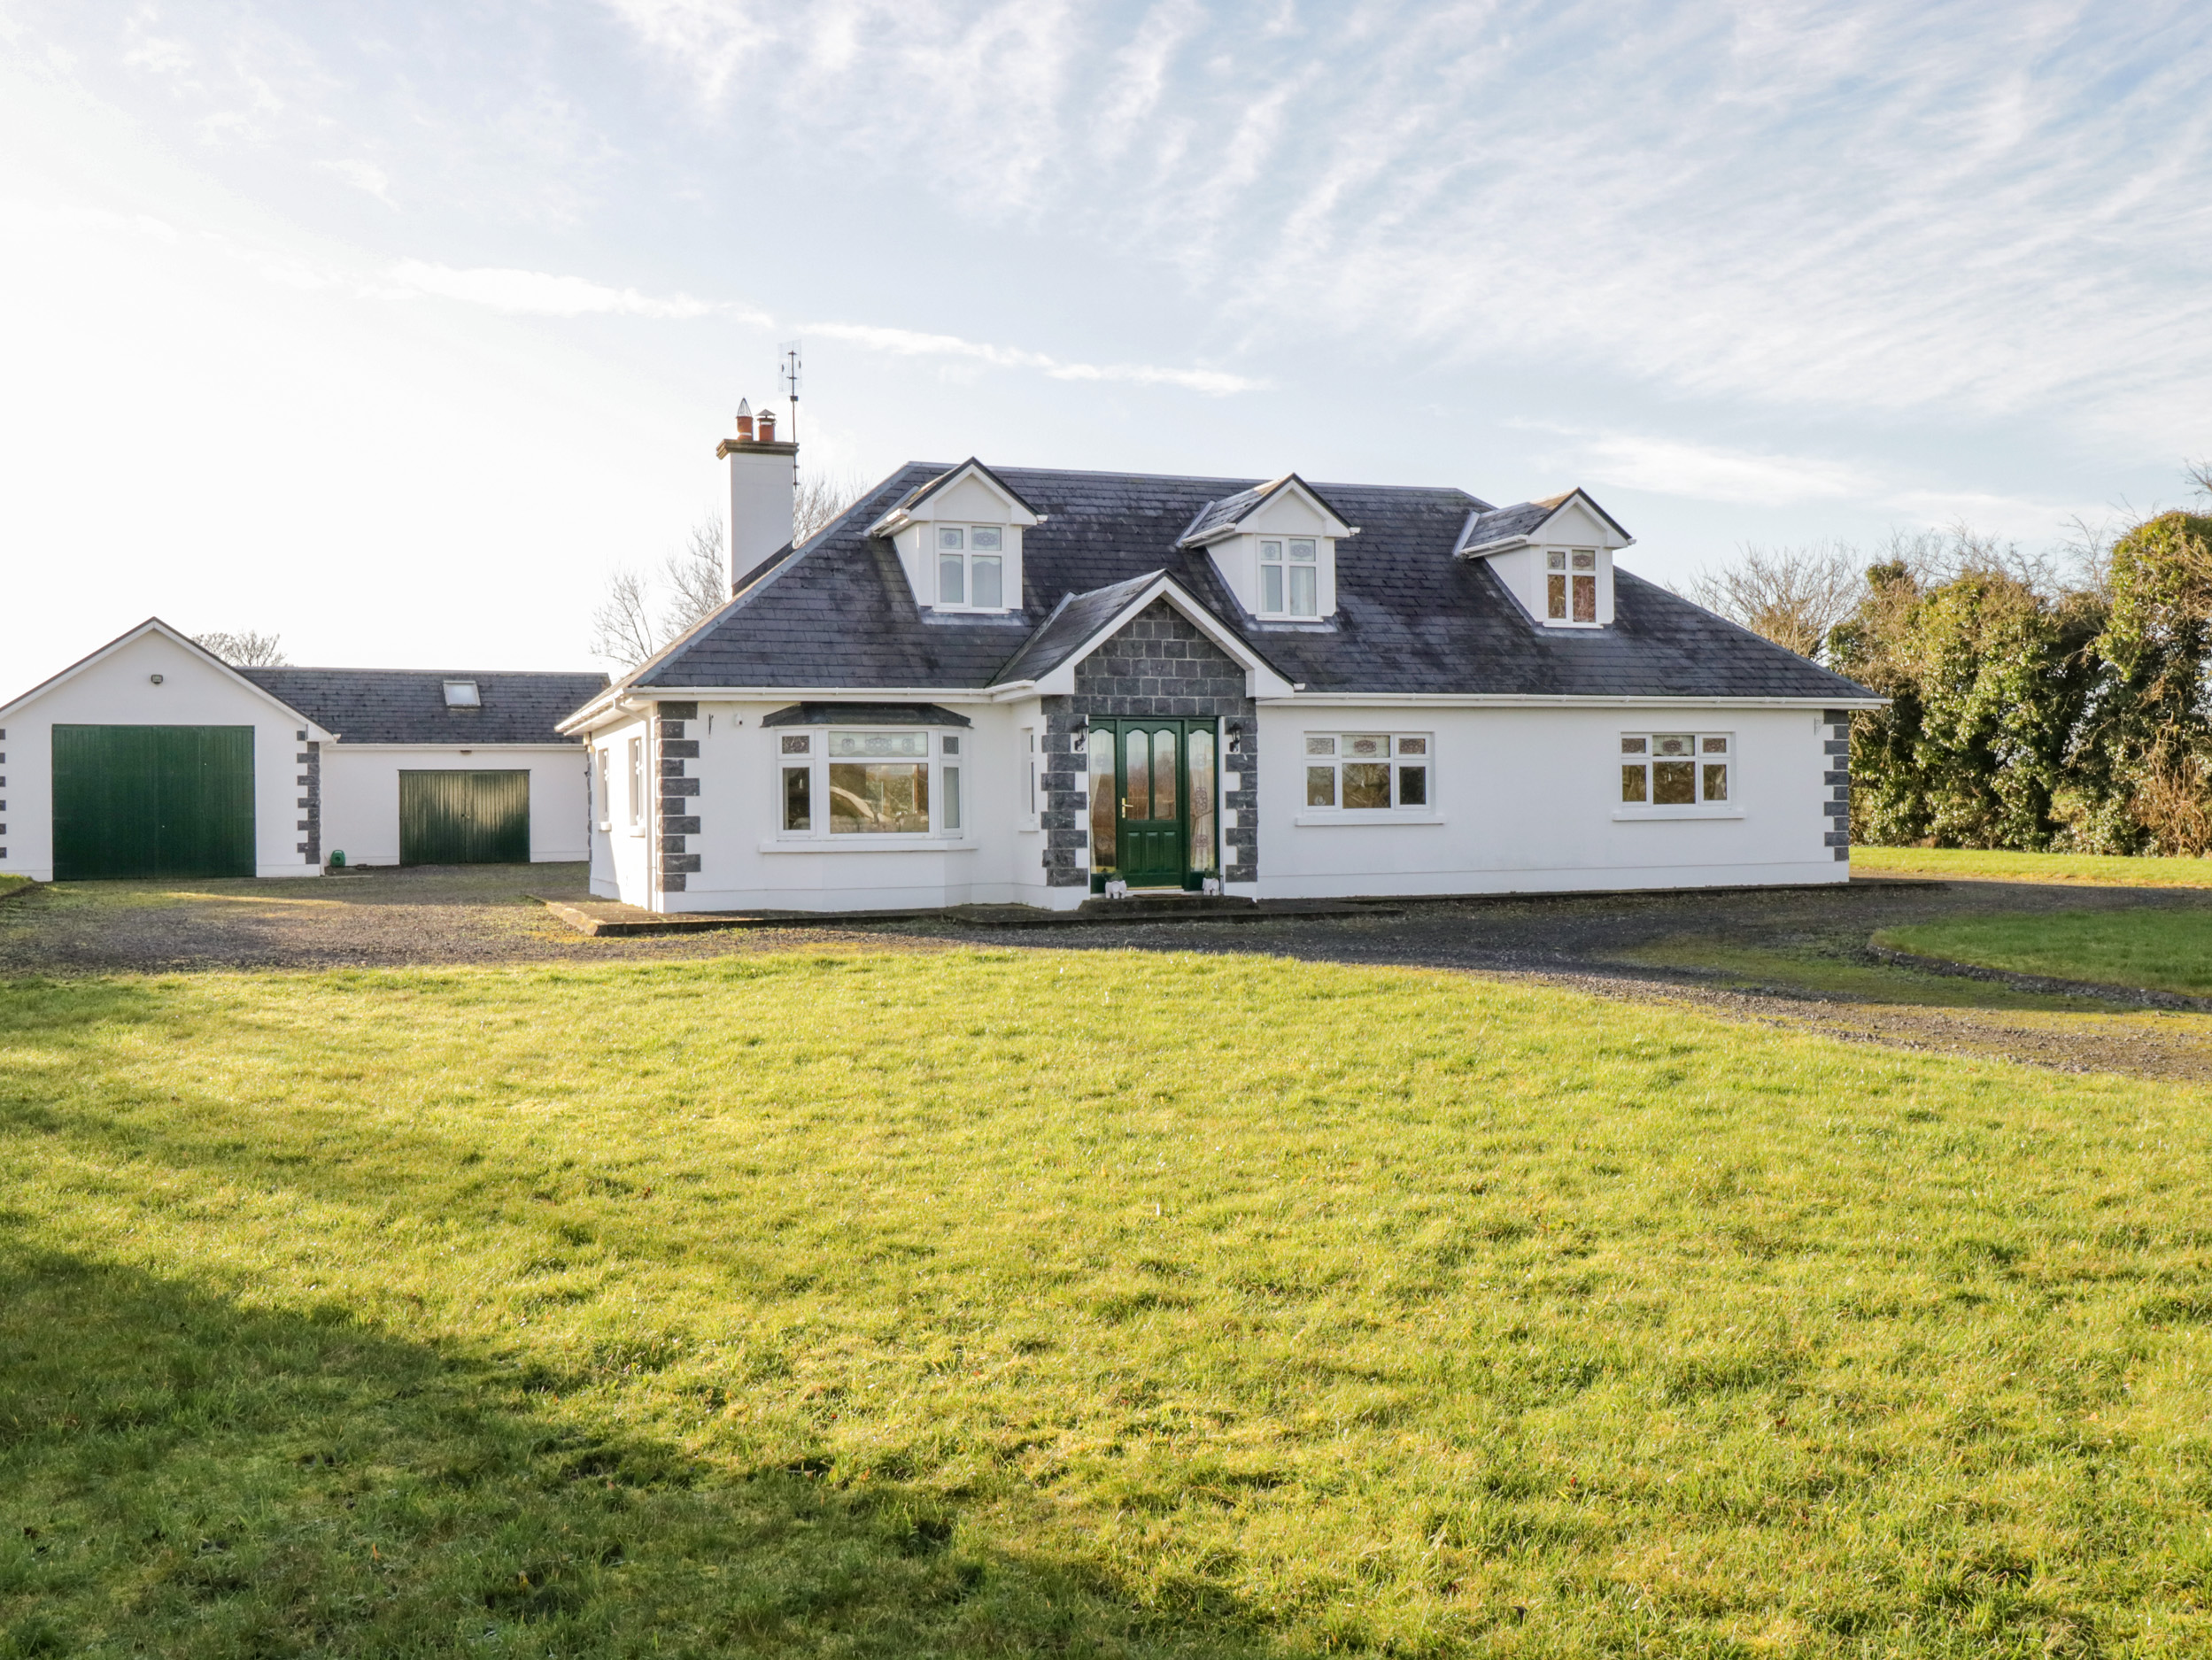 Home Farm Retreat, Williamstown, County Galway